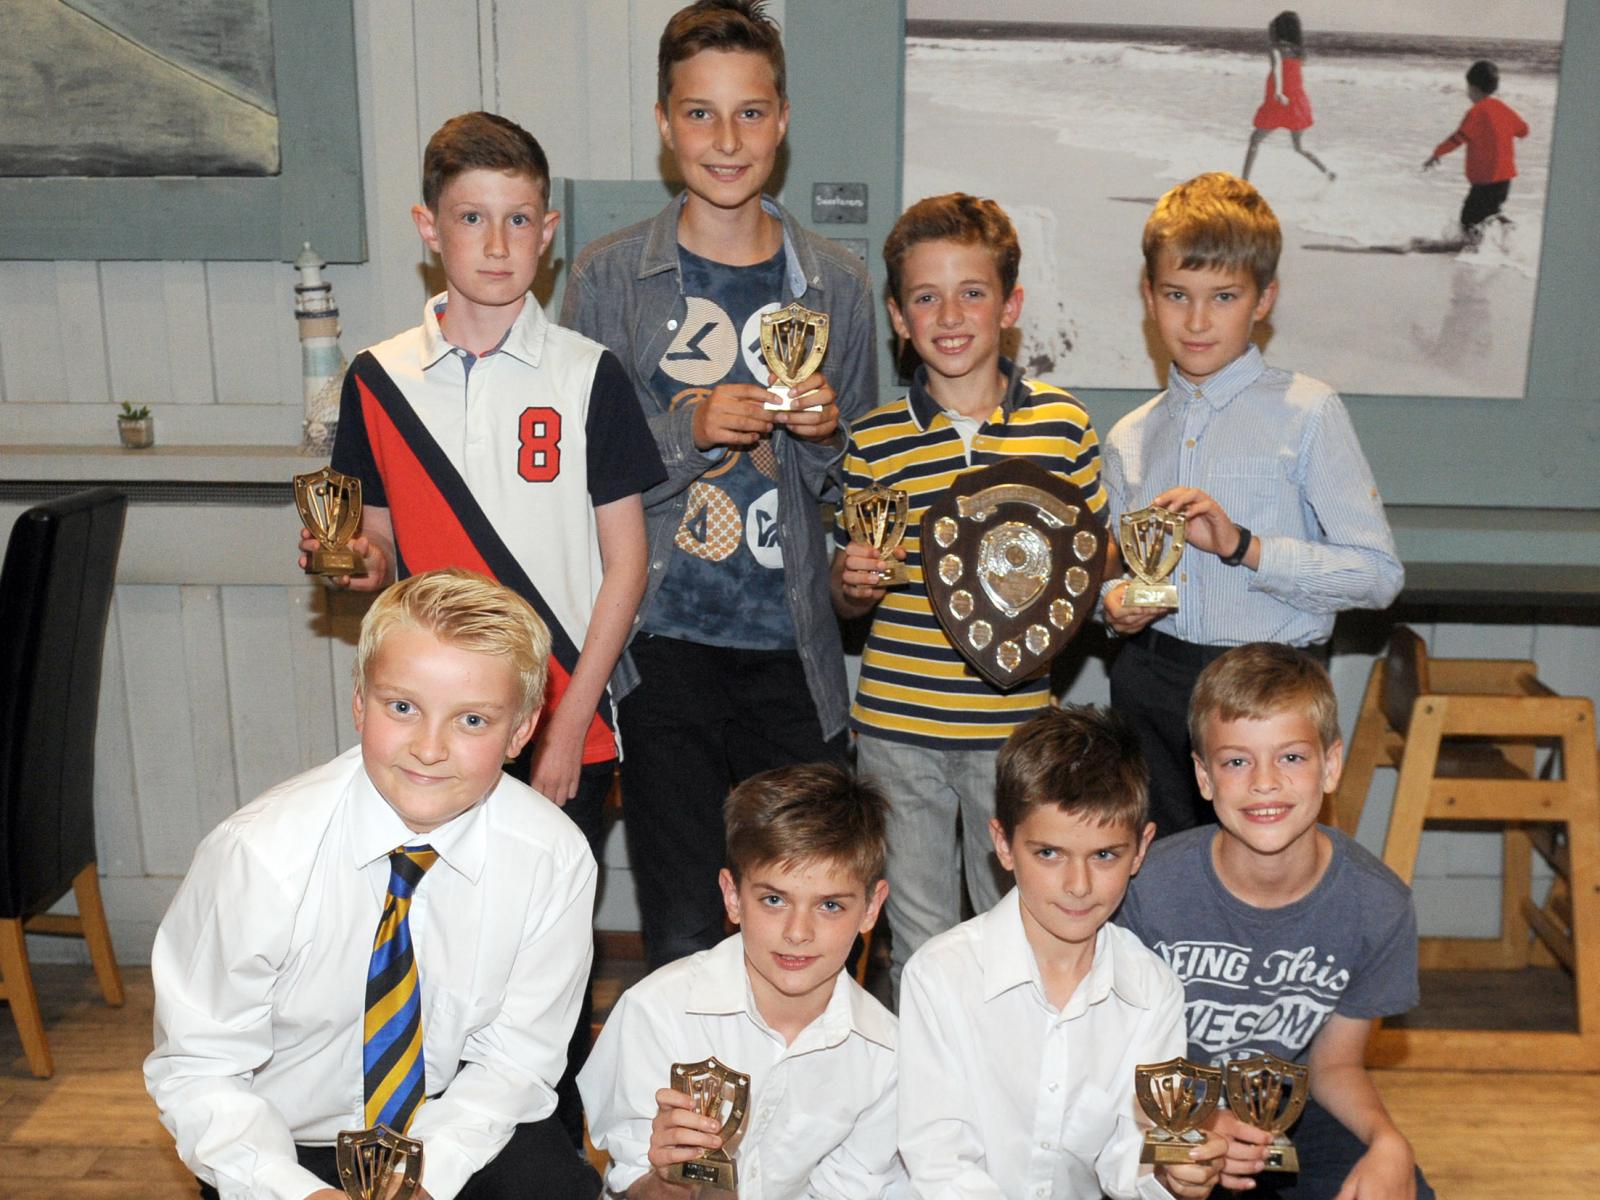 Ottery St Mary, who won the U11 Division